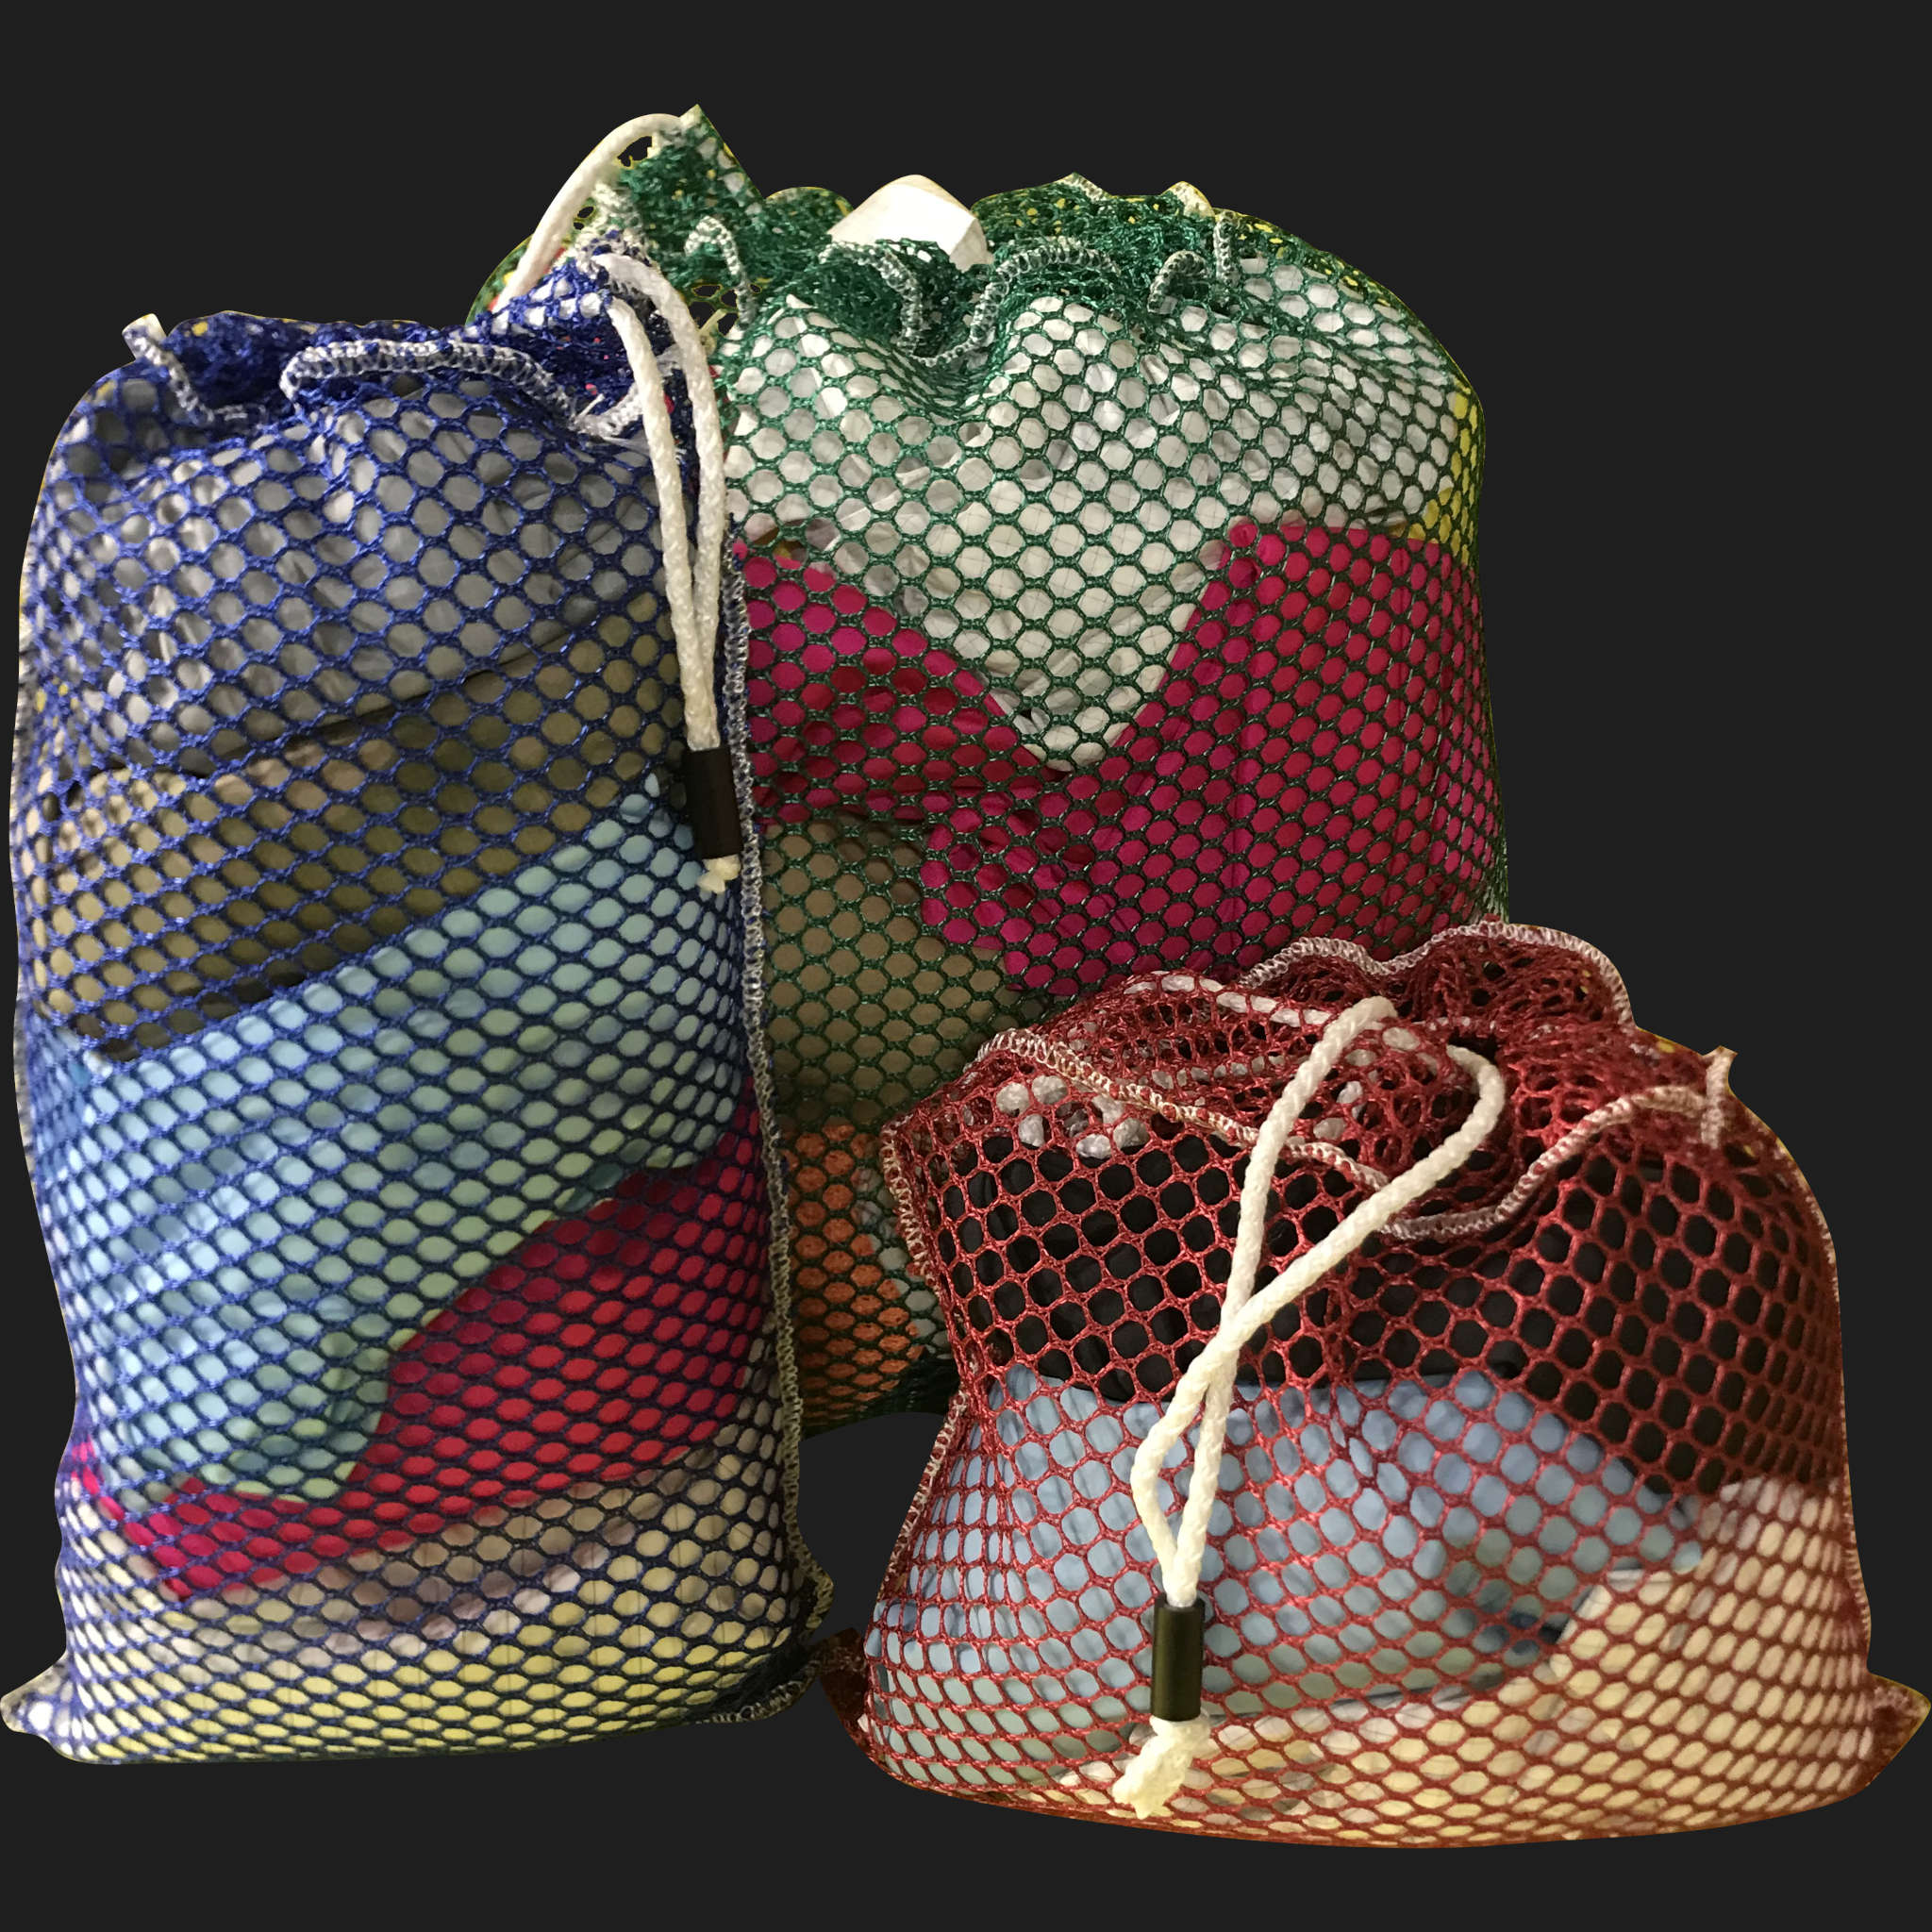 26" x 46" Customized Mesh-Net-Laundry Bags Heavy Duty with Cord and barrellock closure